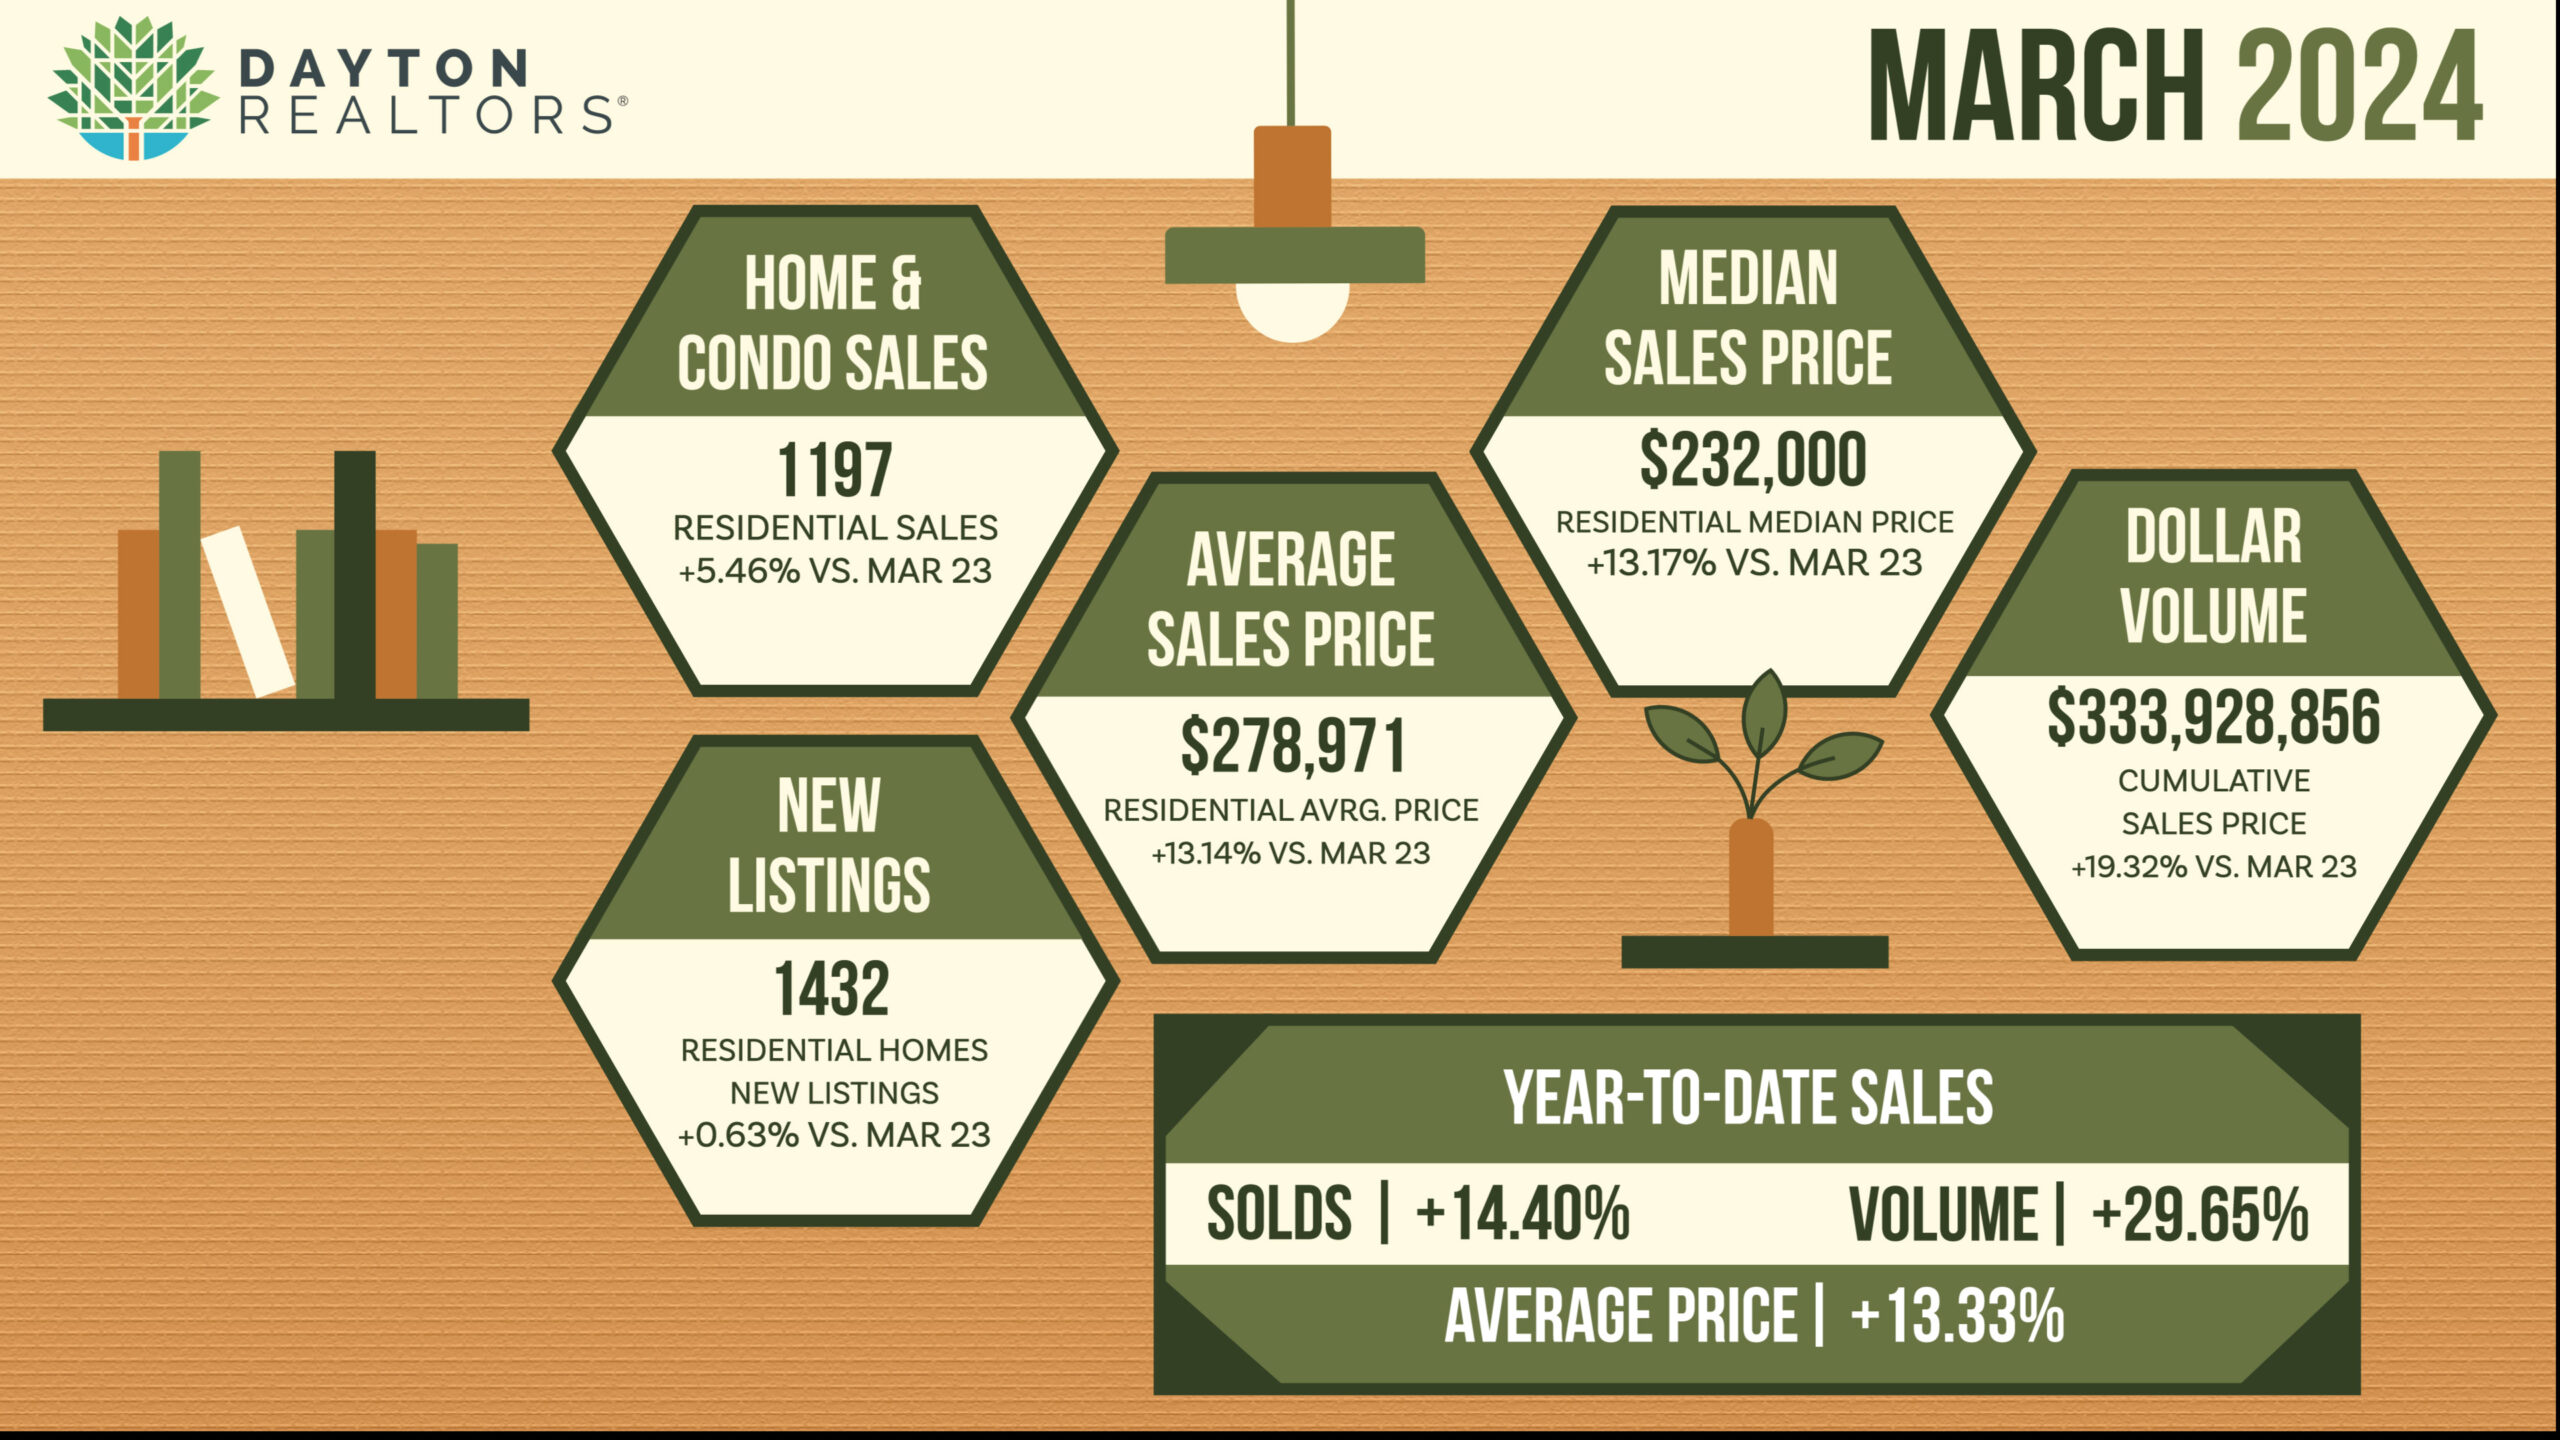 Dayton Area Home Sales for March 2024